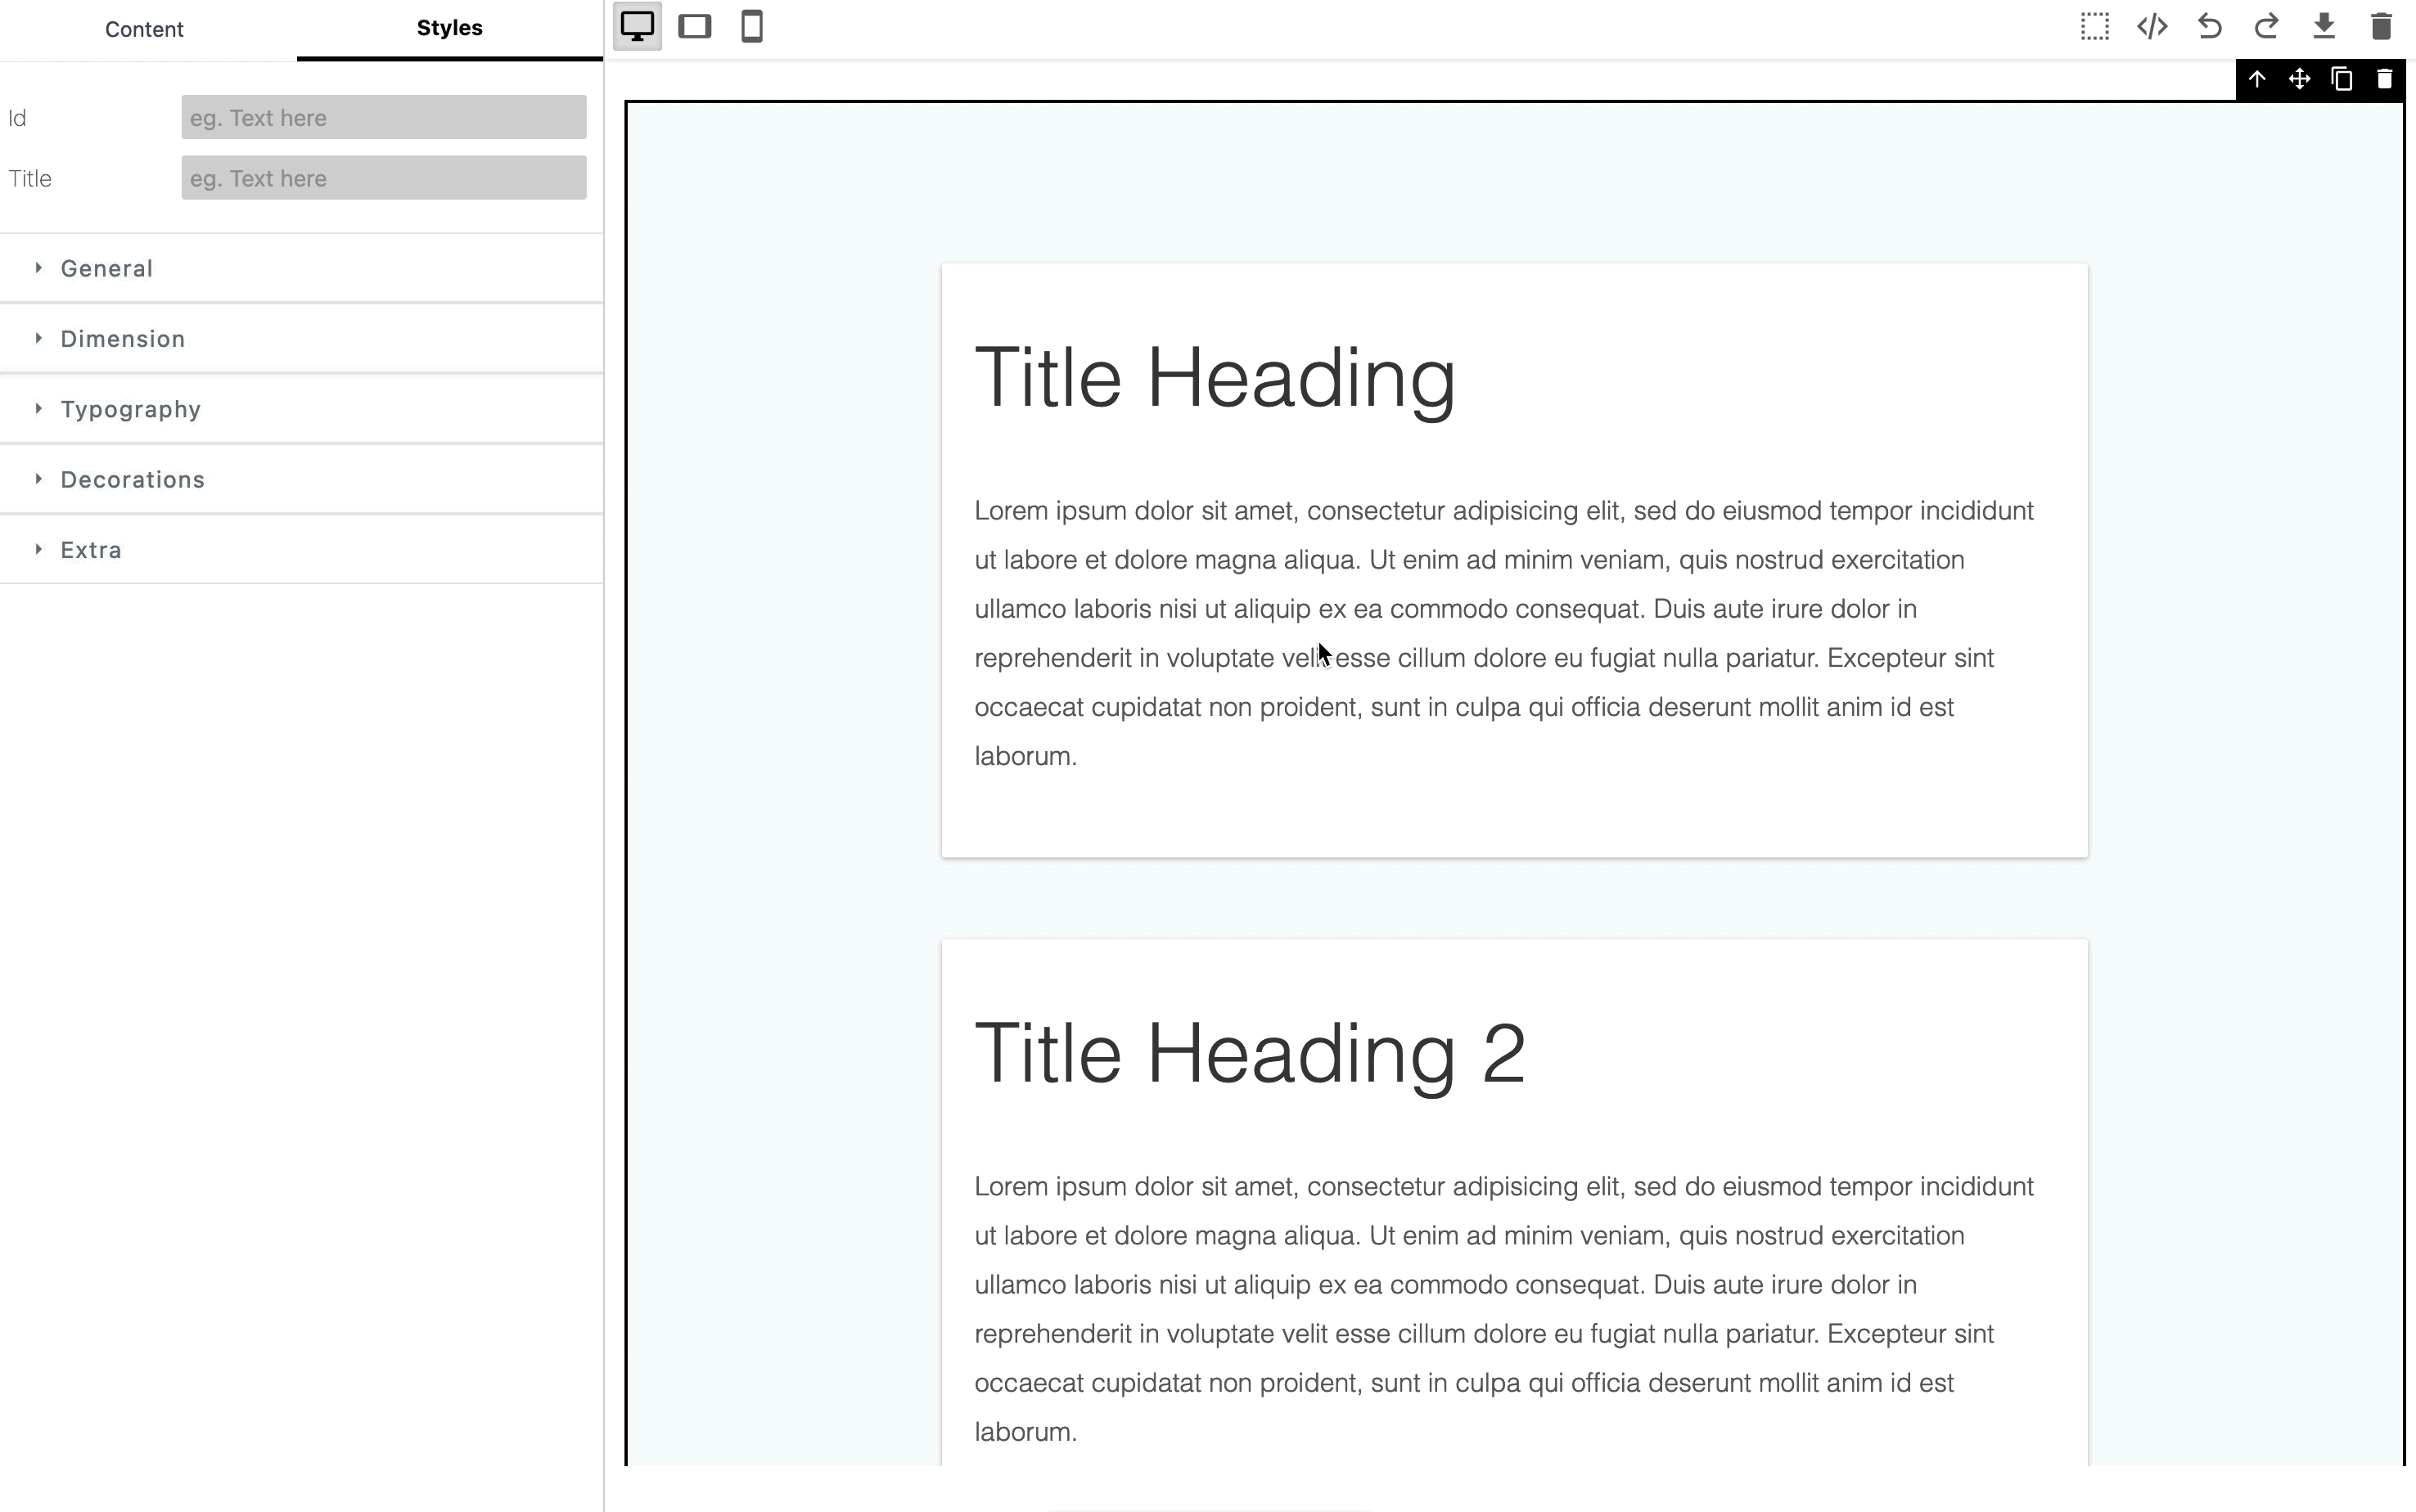 Placeholder 2.0 - New dragging effect for components